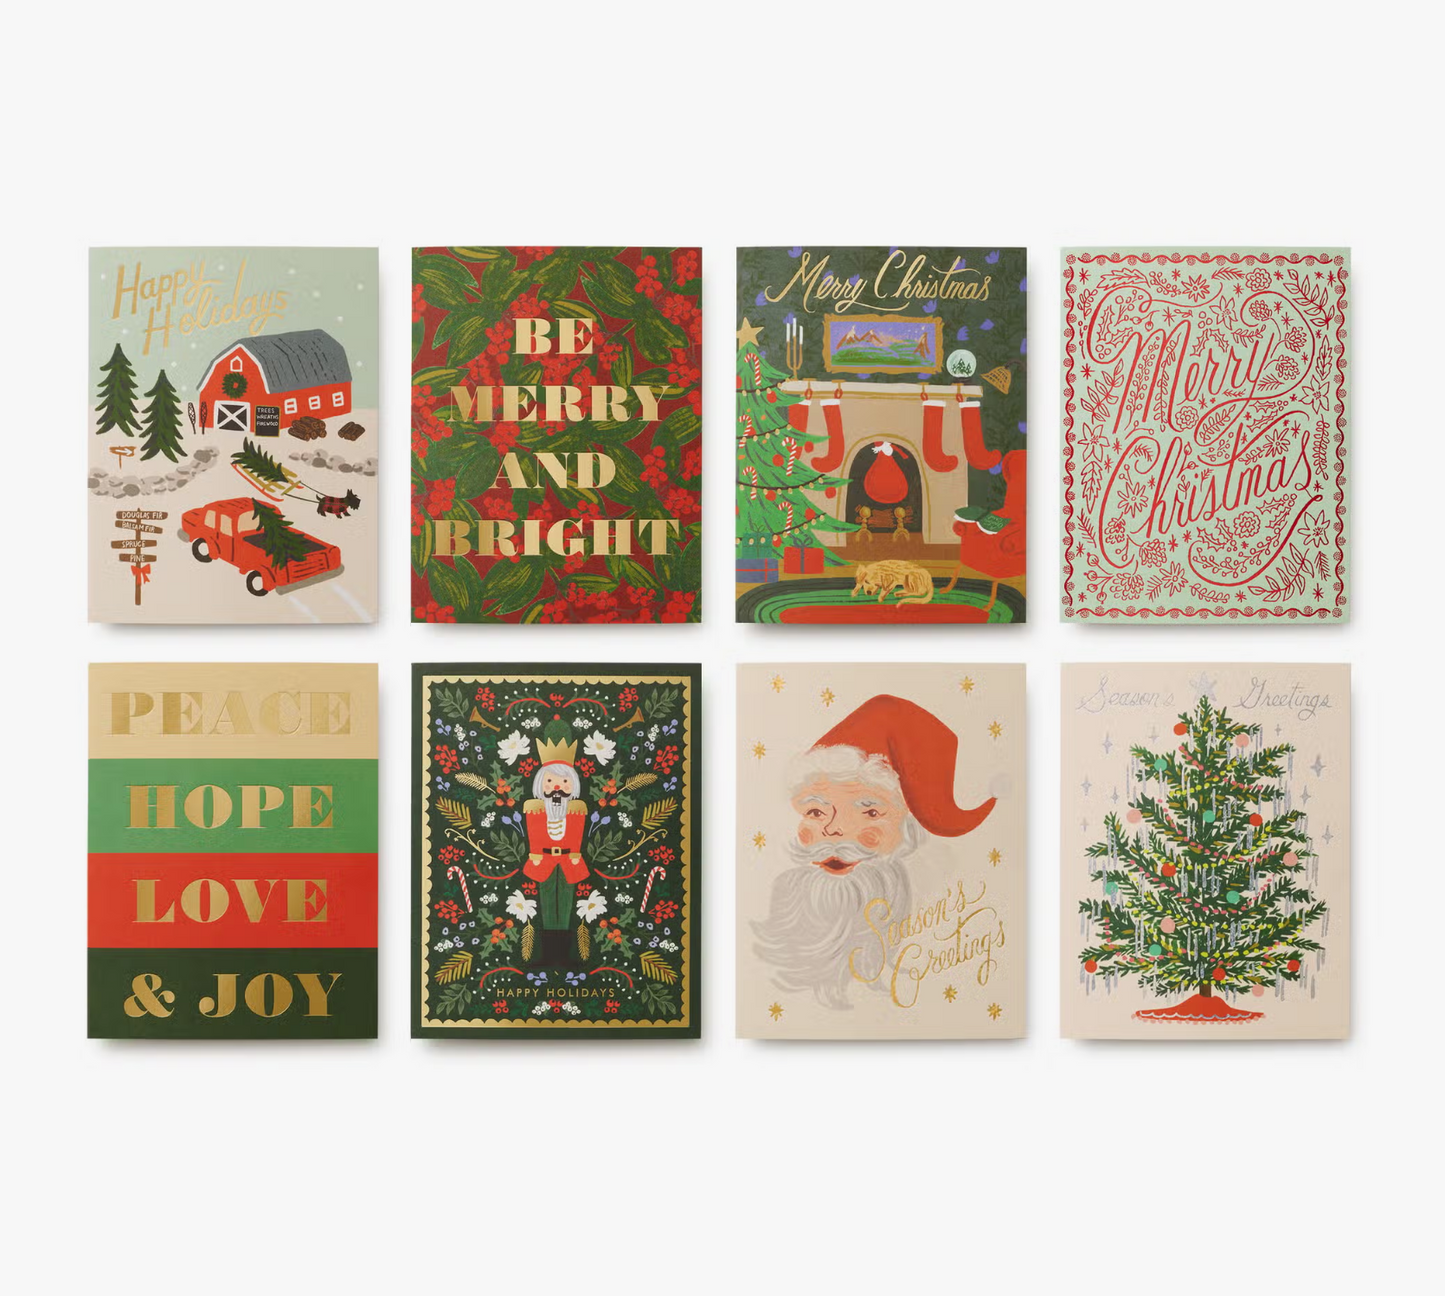 Load image into Gallery viewer, Holiday Essentials Card Box by Rifle Paper Co.
